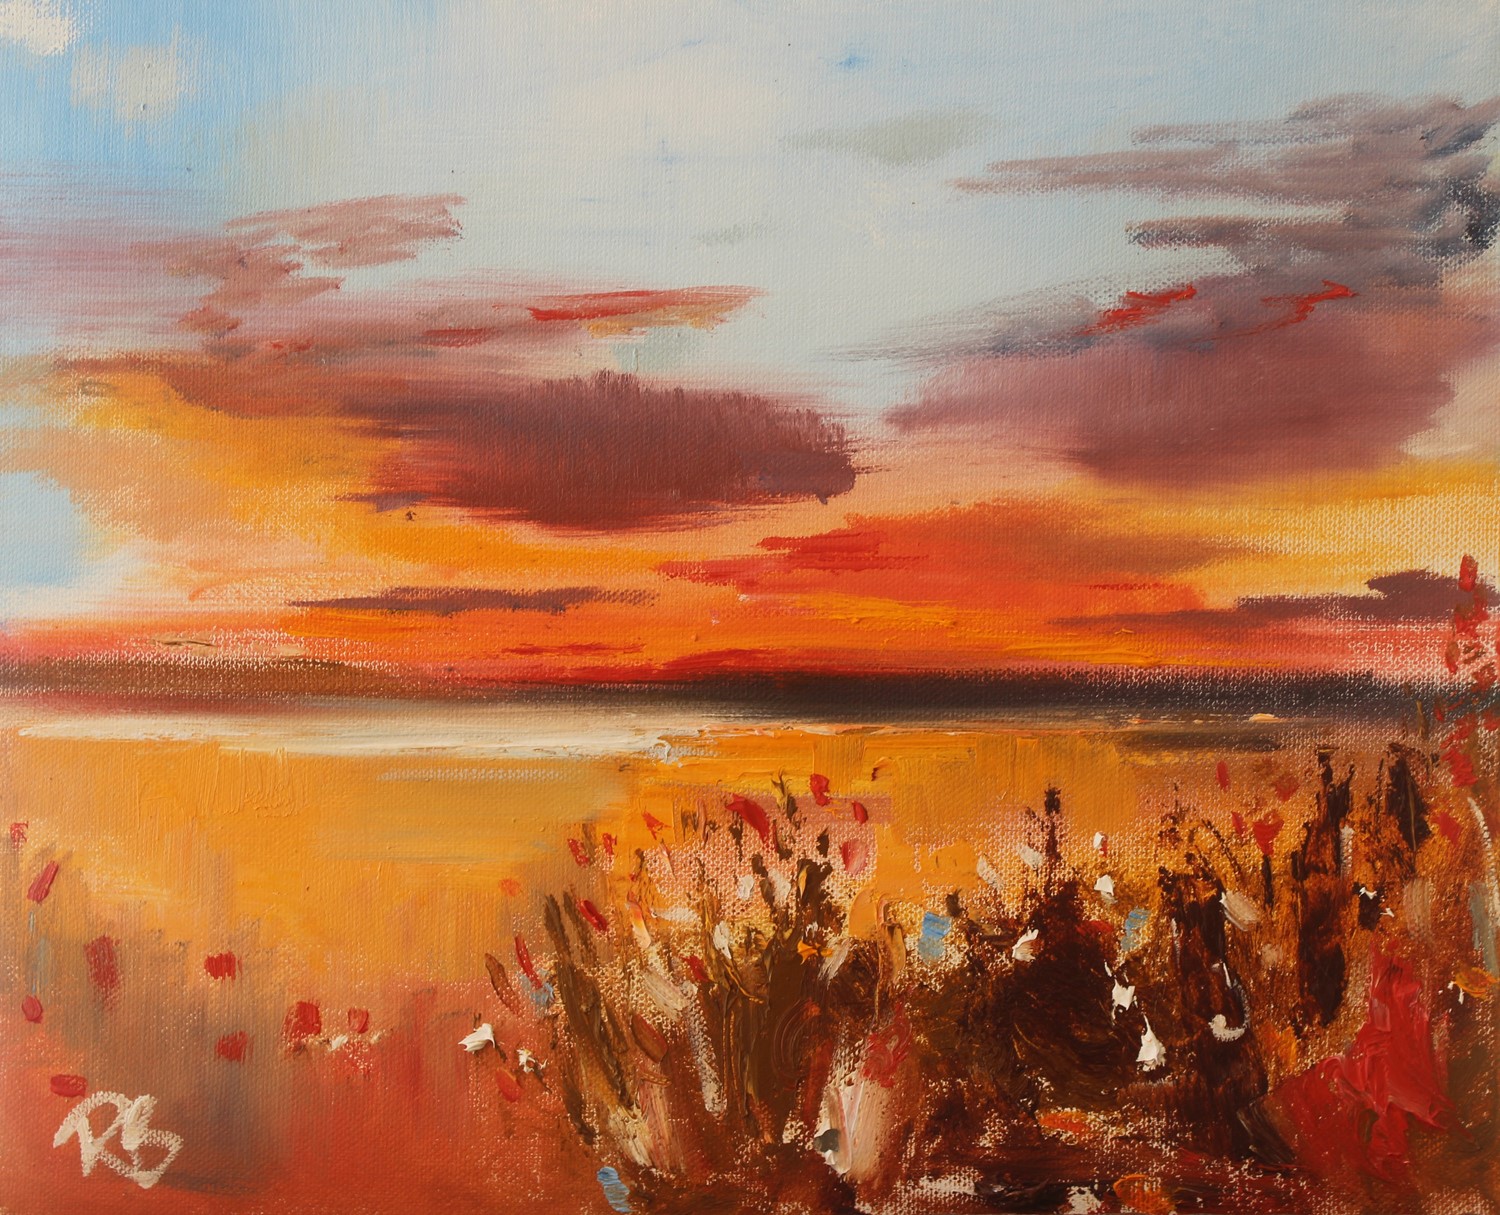 'Red Sky at Night' by artist Rosanne Barr